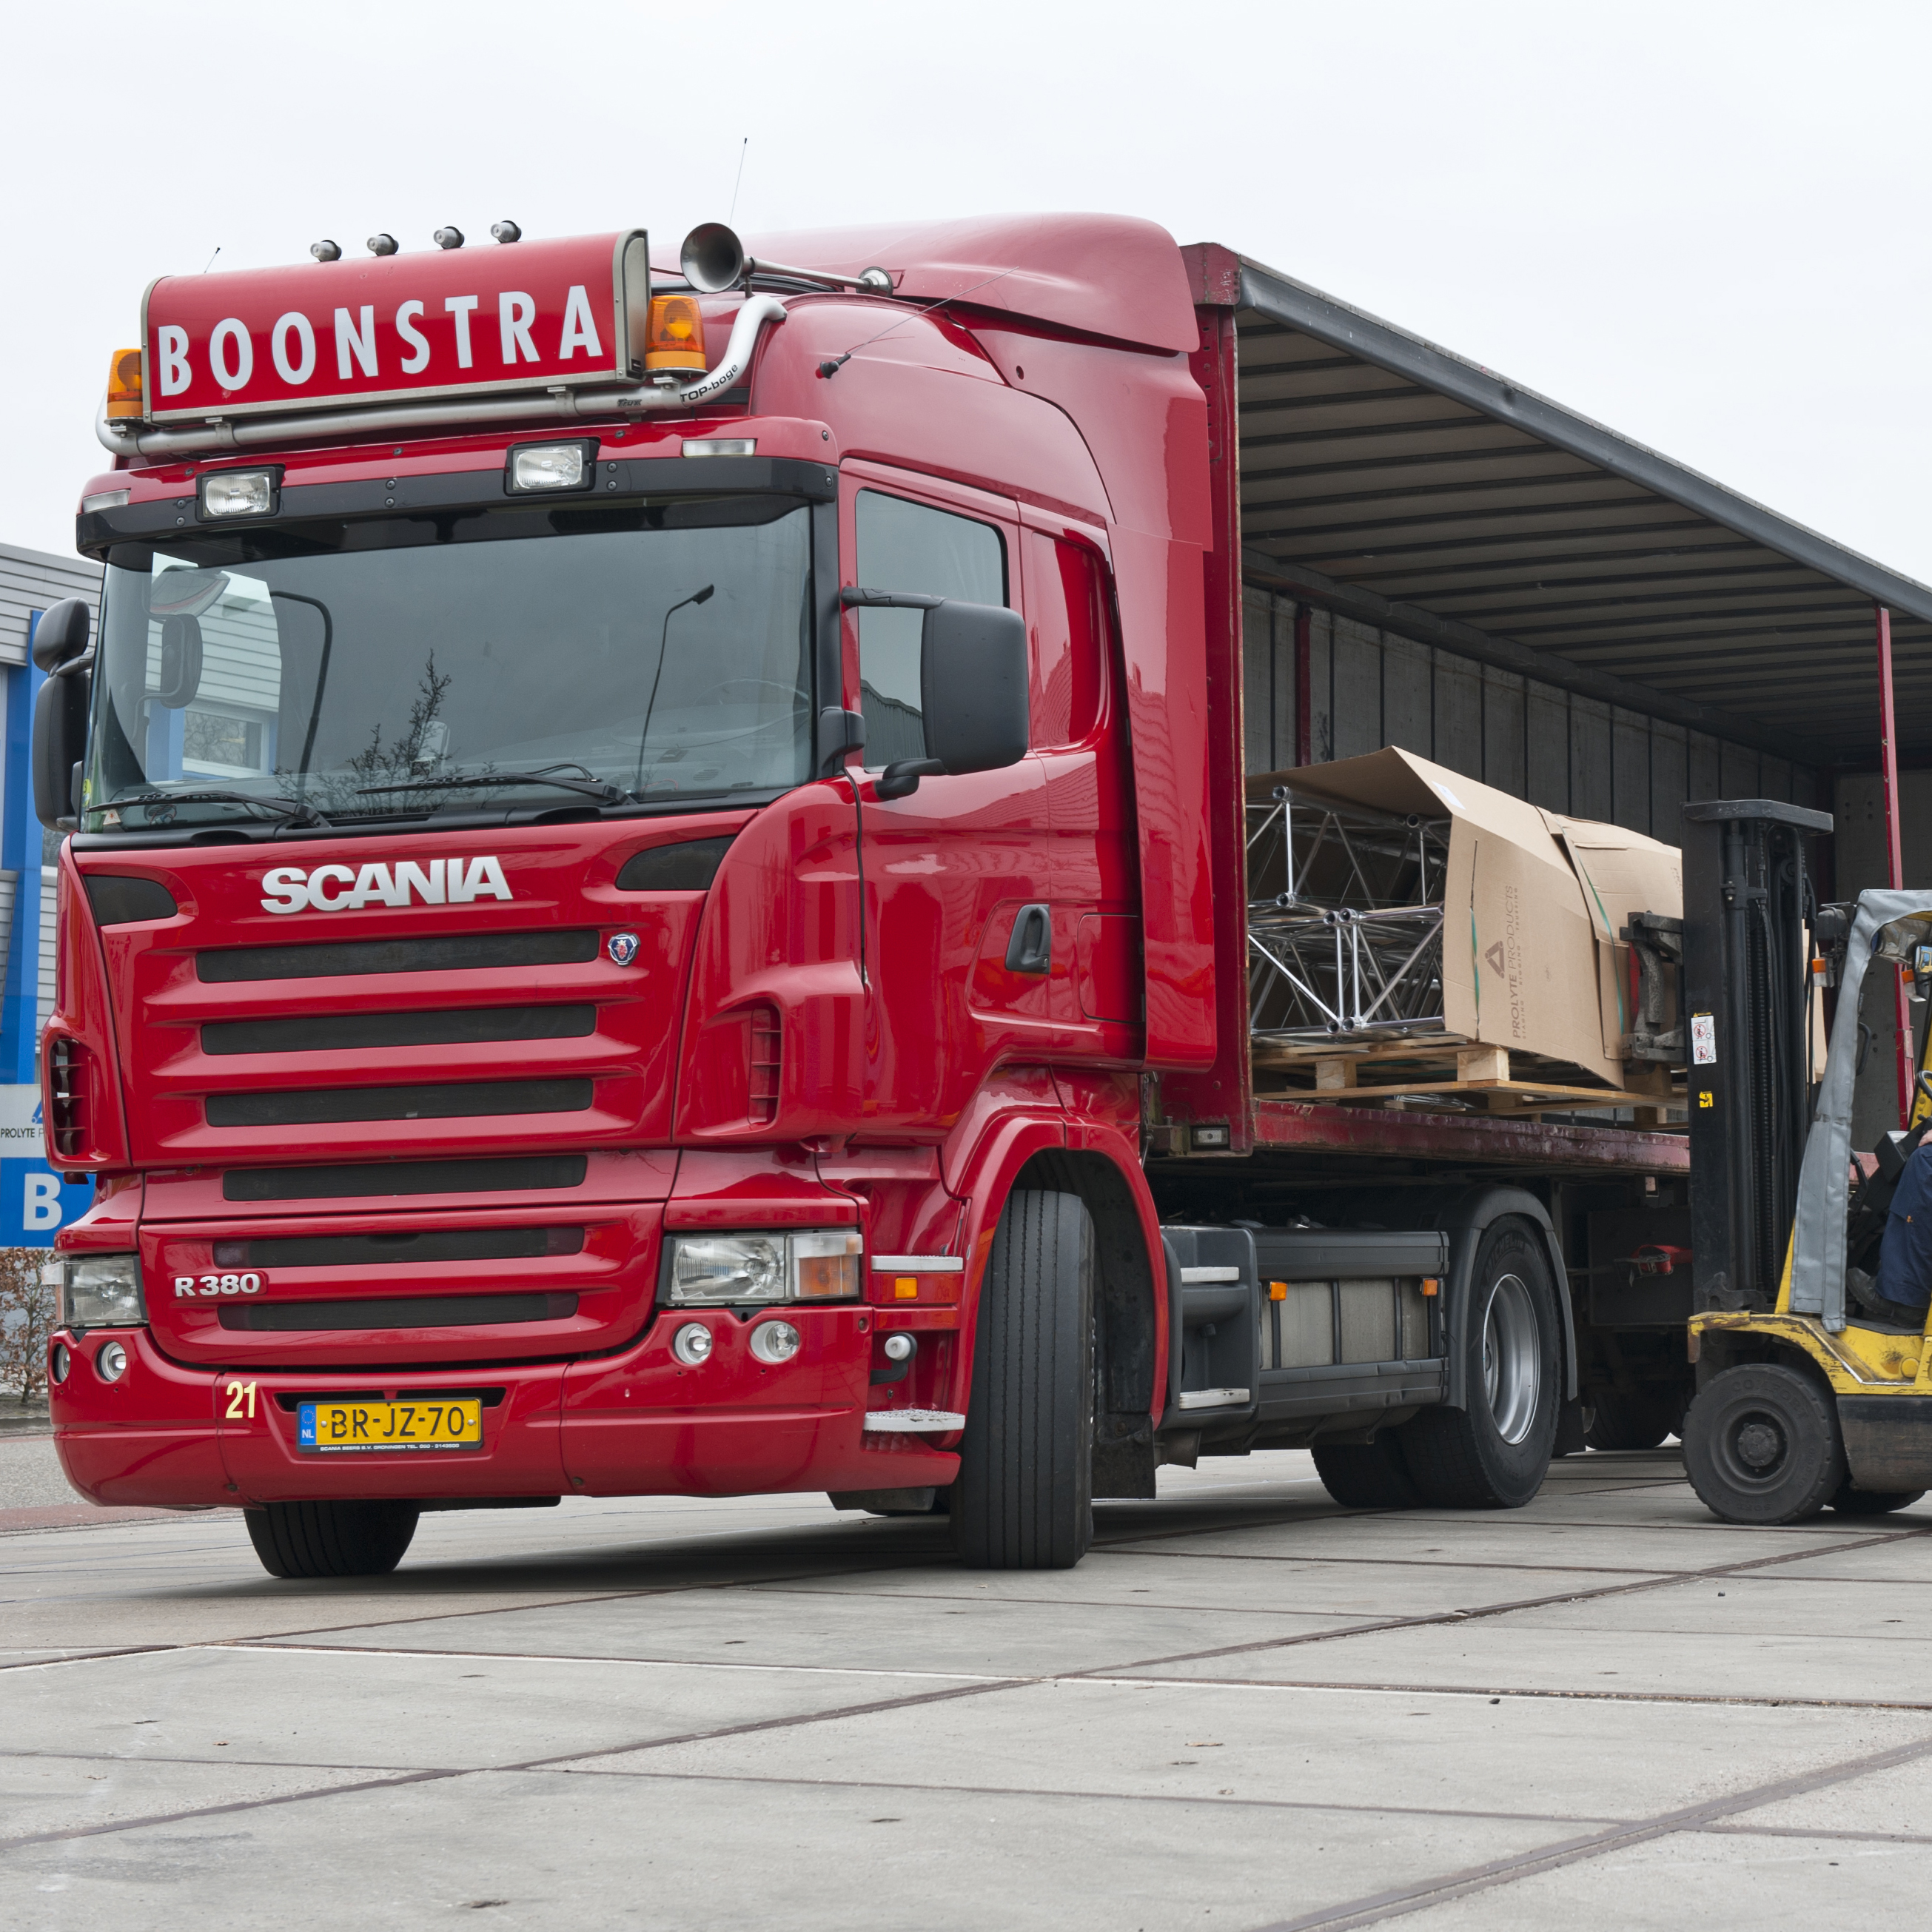 PRG Chooses Prolyte for European Trussing Inventory